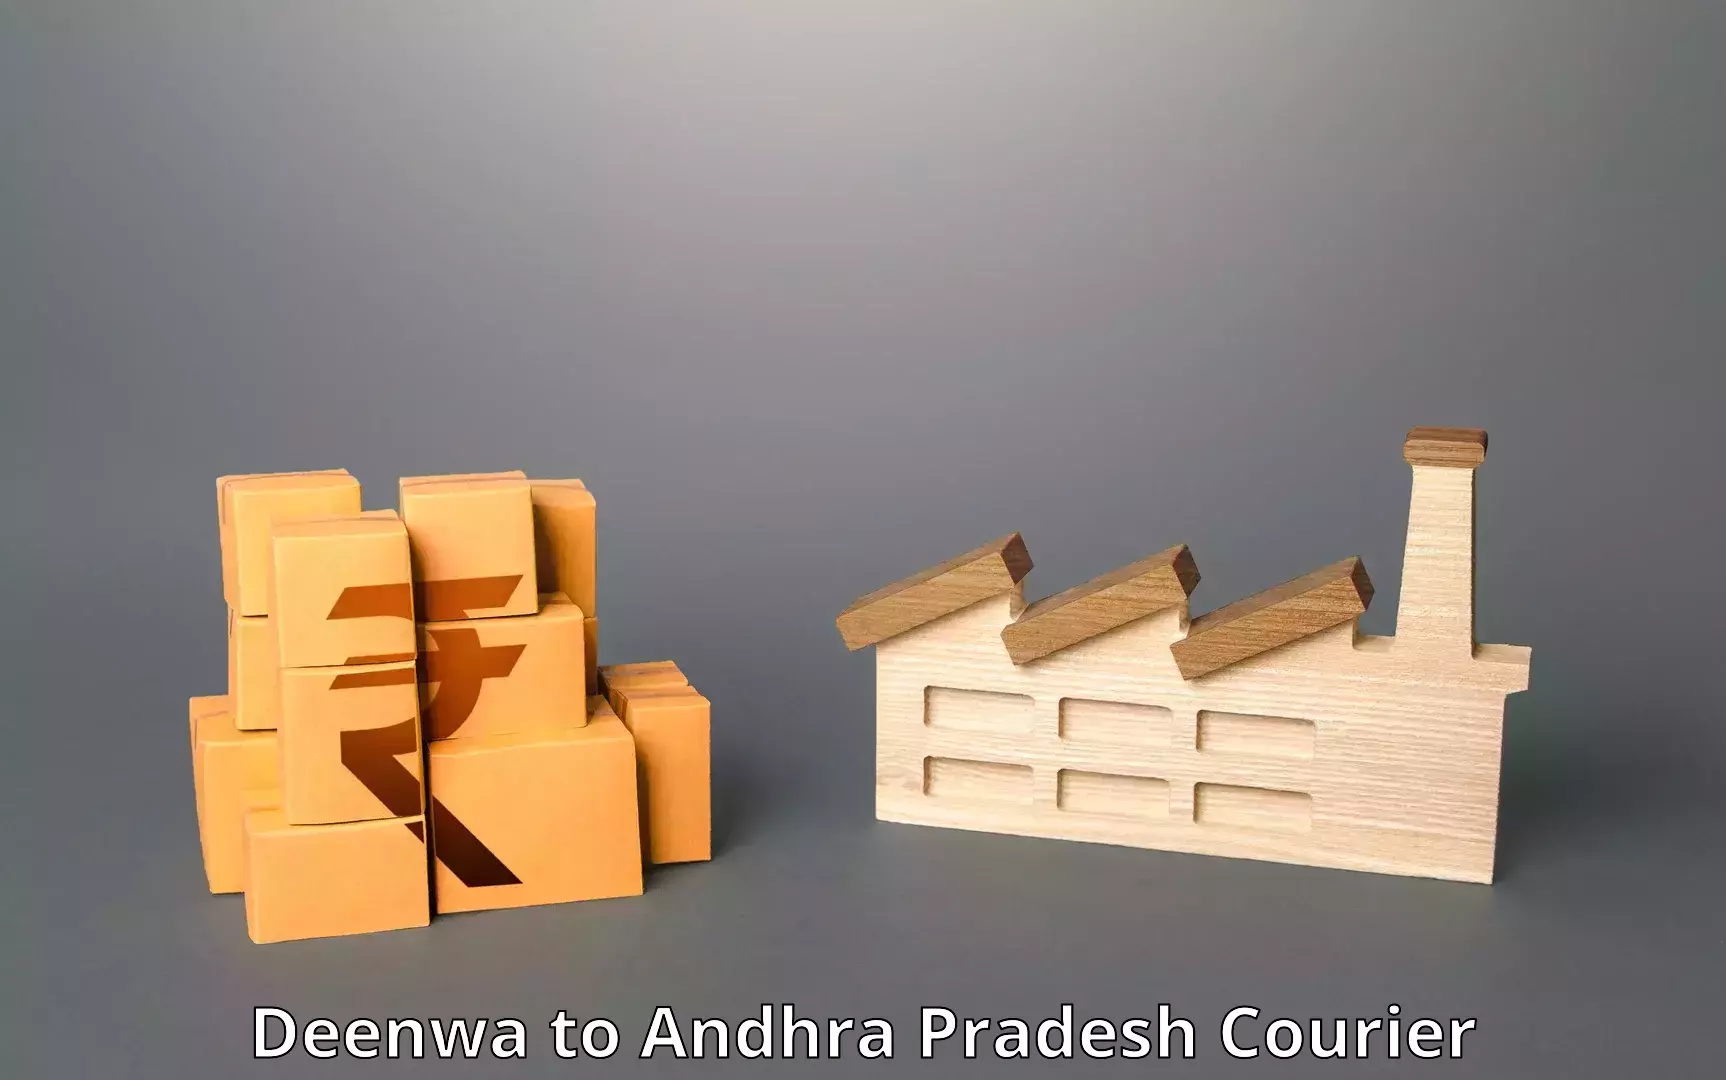 Seamless shipping experience Deenwa to Nellore